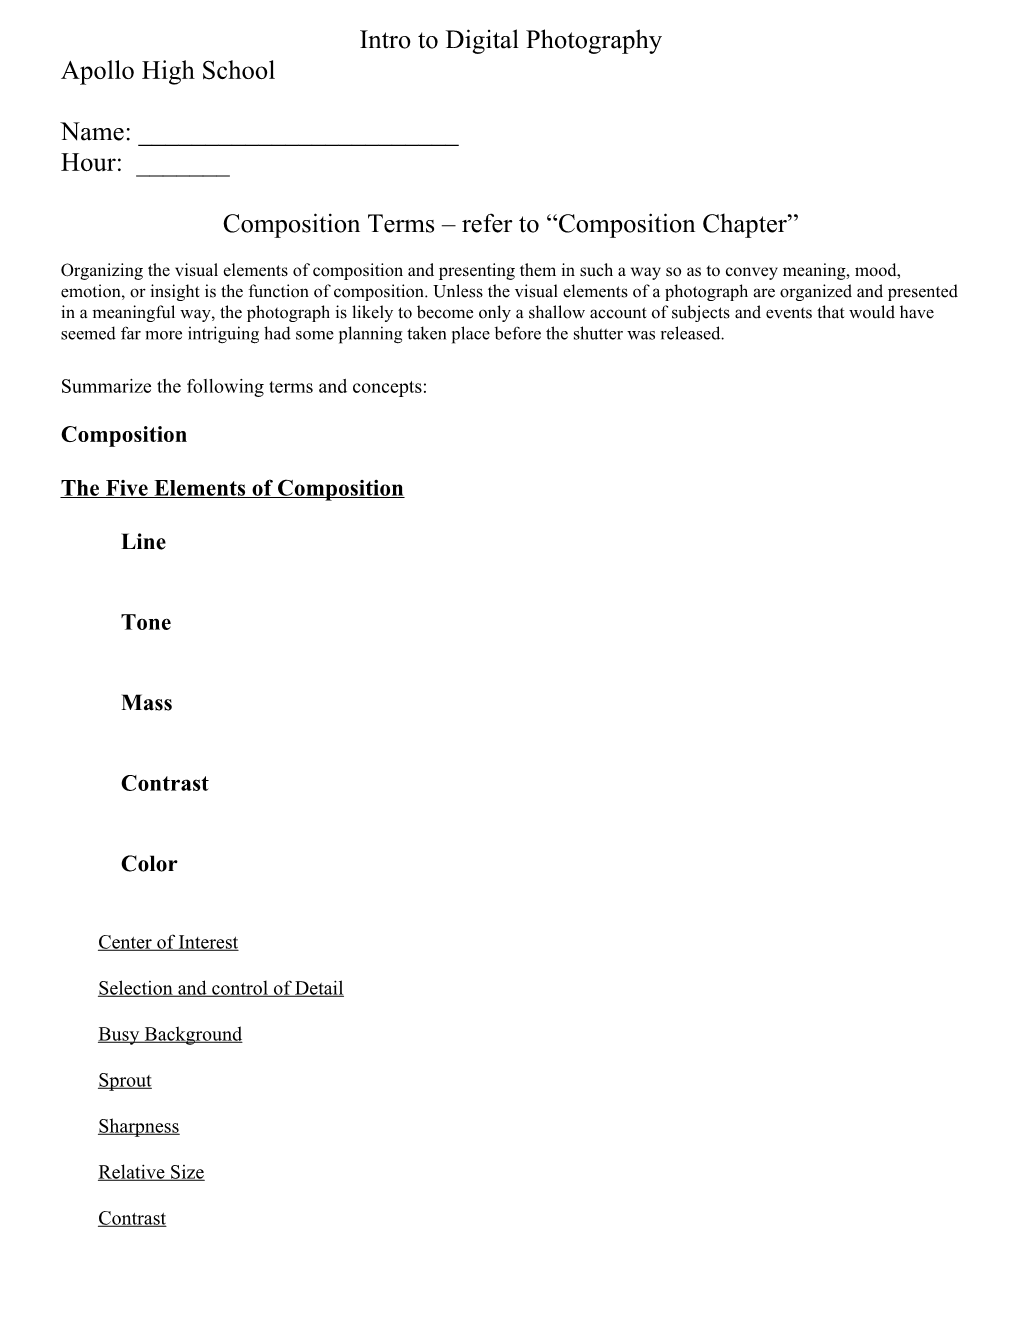 Composition Terms Refer to Composition Chapter